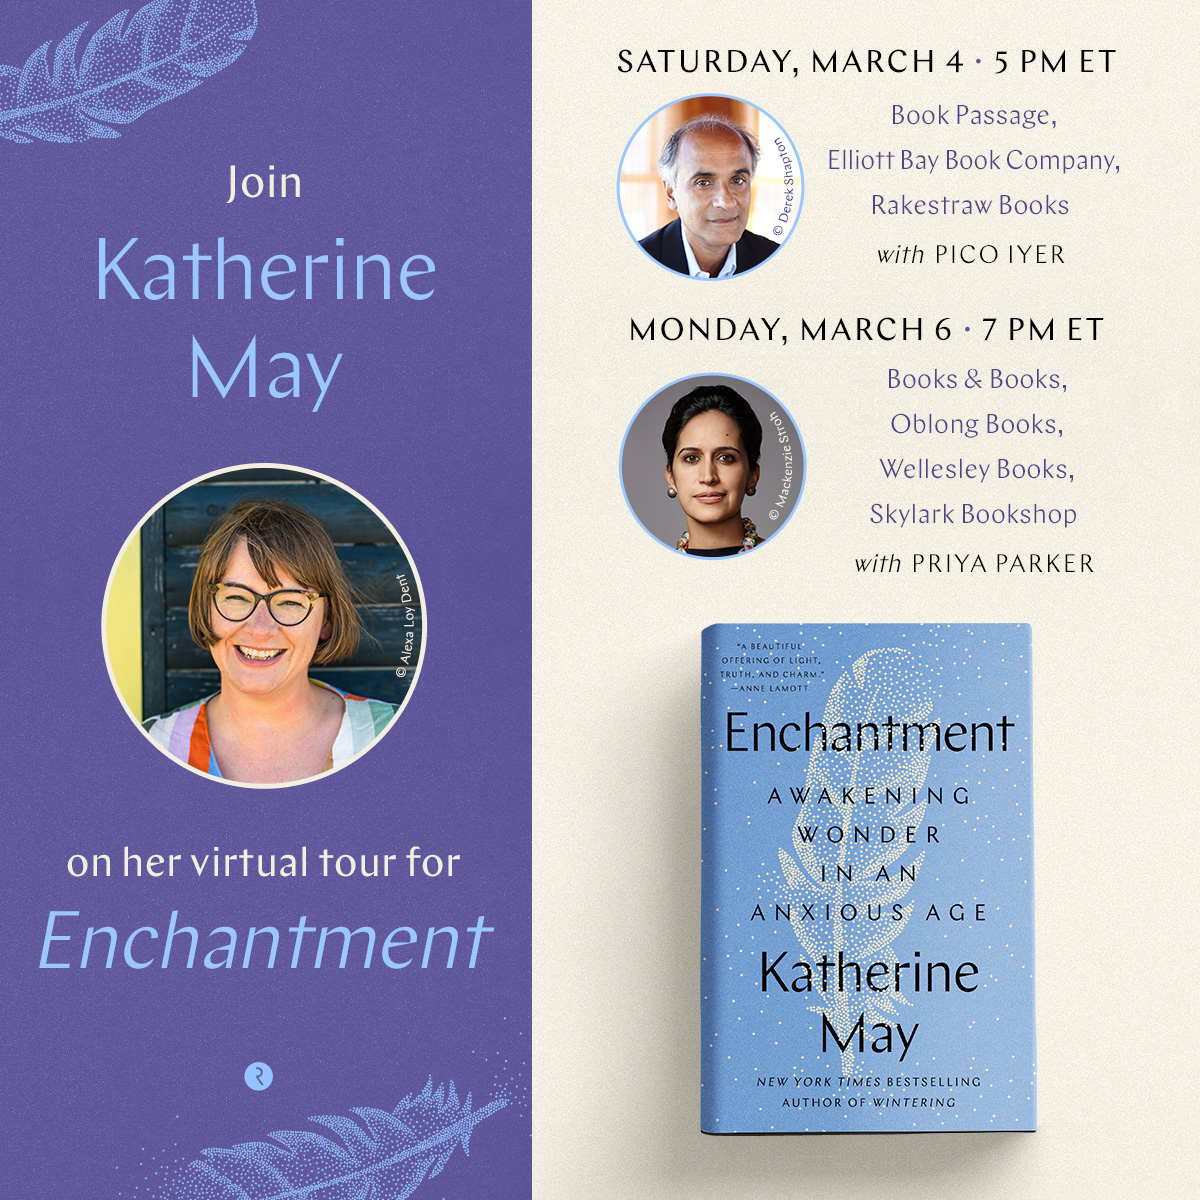 ✨TONIGHT ✨ Katherine May will be talking about her new book ENCHANTMENT with @priyaparker. Sign up here: eventbrite.com/e/katherine-ma…